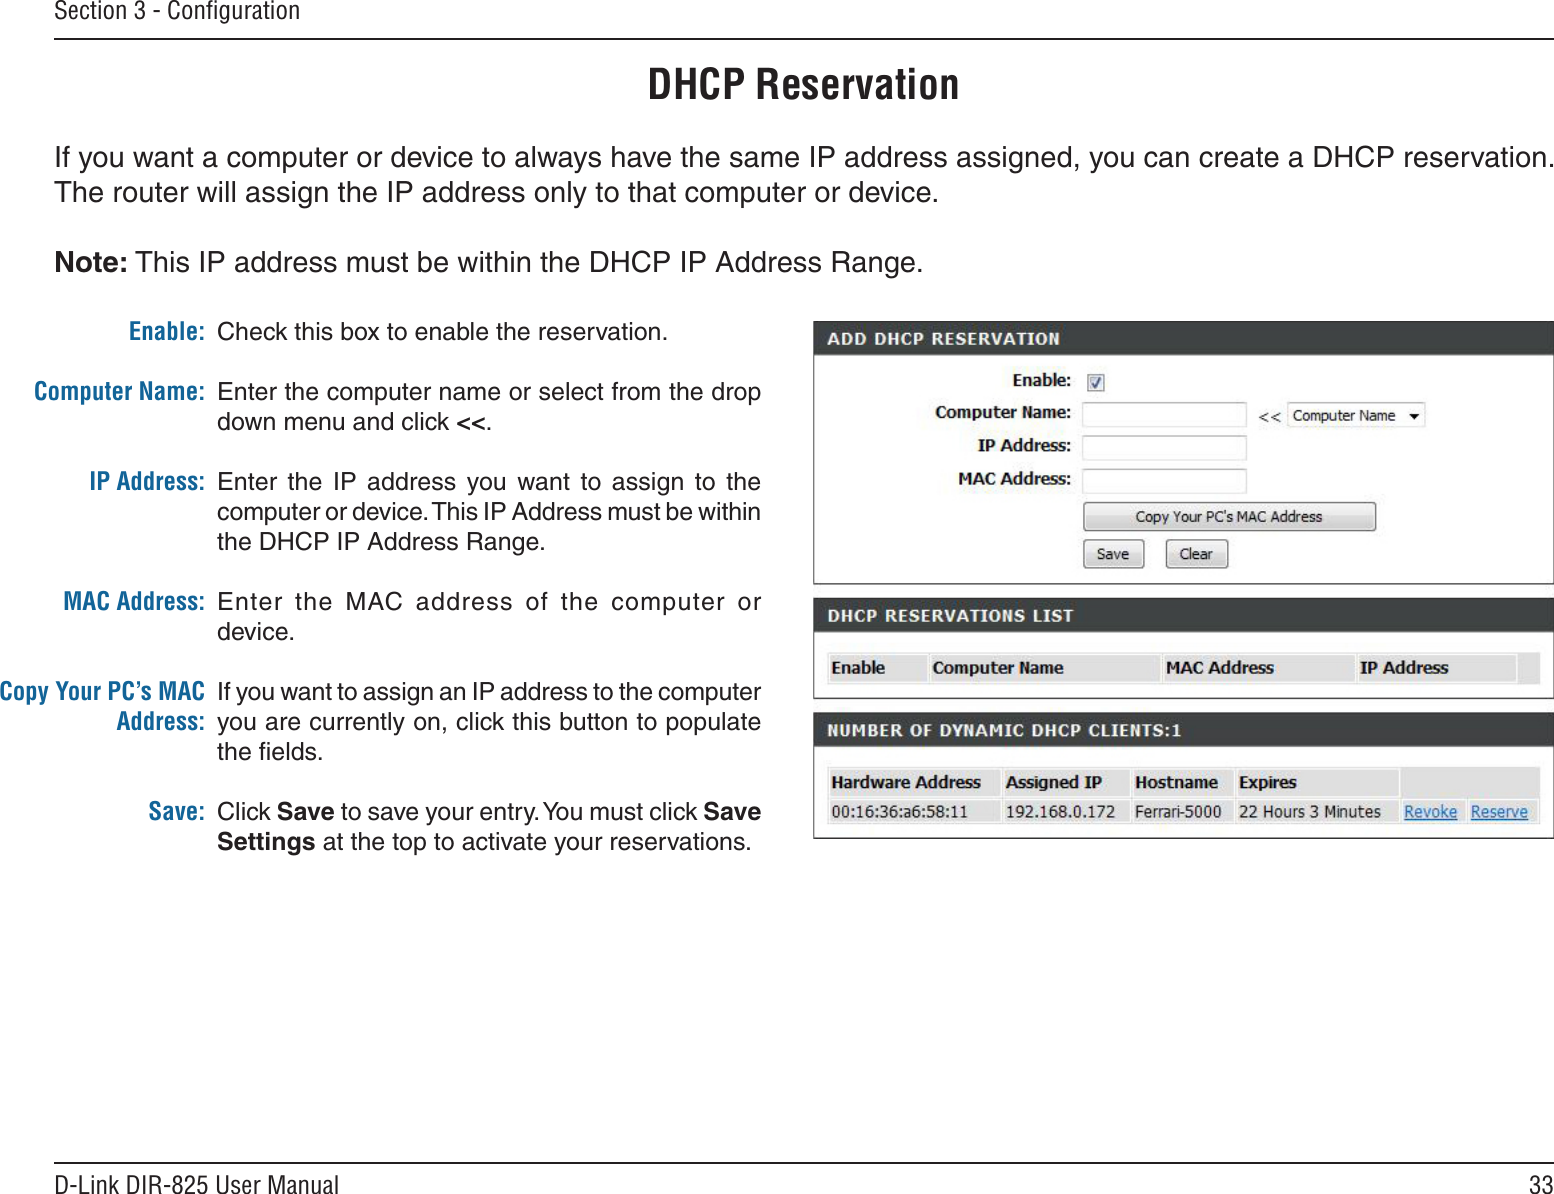 33D-Link DIR-825 User ManualSection 3 - ConﬁgurationDHCP ReservationIf you want a computer or device to always have the same IP address assigned, you can create a DHCP reservation. The router will assign the IP address only to that computer or device. Note: This IP address must be within the DHCP IP Address Range.Check this box to enable the reservation.Enter the computer name or select from the drop down menu and click &lt;&lt;.Enter  the  IP  address  you  want to  assign  to  the computer or device. This IP Address must be within the DHCP IP Address Range.Enter  the  MAC  address  of  the  computer  or device.If you want to assign an IP address to the computer you are currently on, click this button to populate the ﬁelds. Click Save to save your entry. You must click Save Settings at the top to activate your reservations. Enable:Computer Name:IP Address:MAC Address:Copy Your PC’s MAC Address:Save: